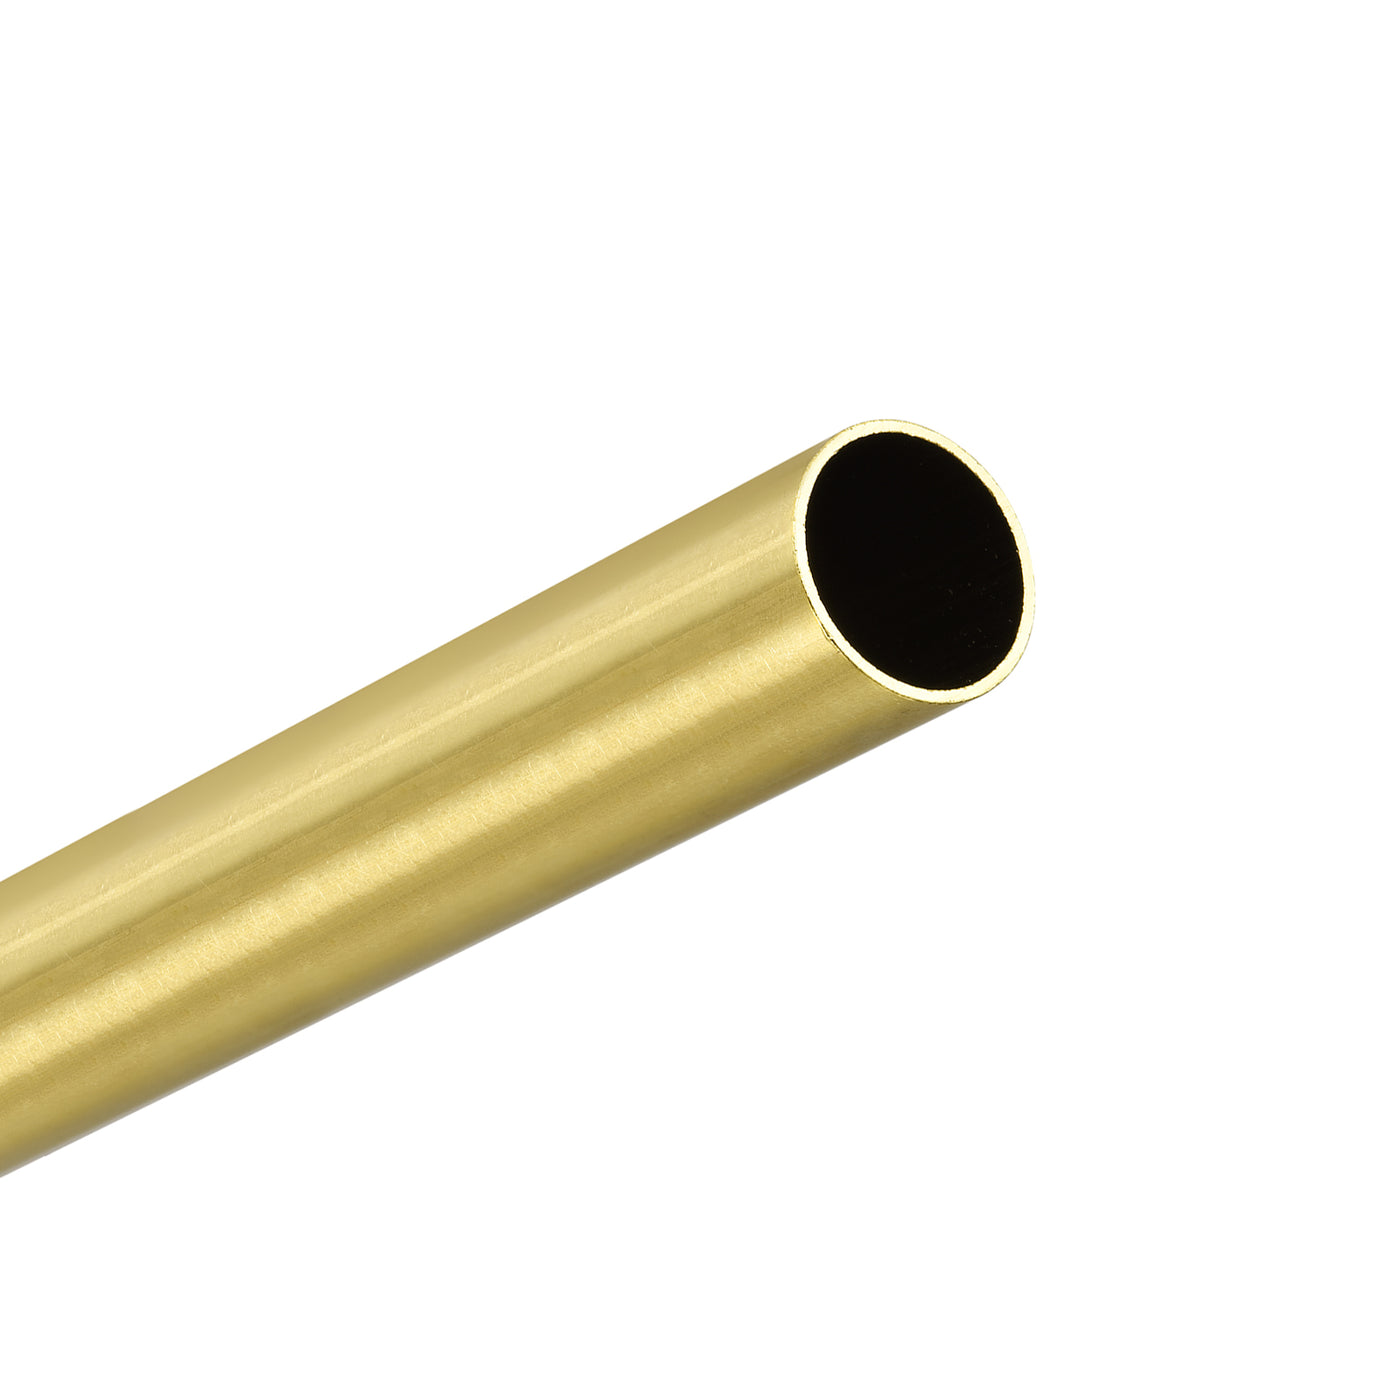 Uxcell Uxcell Brass Round Tube 11mm OD 1mm Wall Thickness 200mm Length Pipe Tubing 2 Pcs